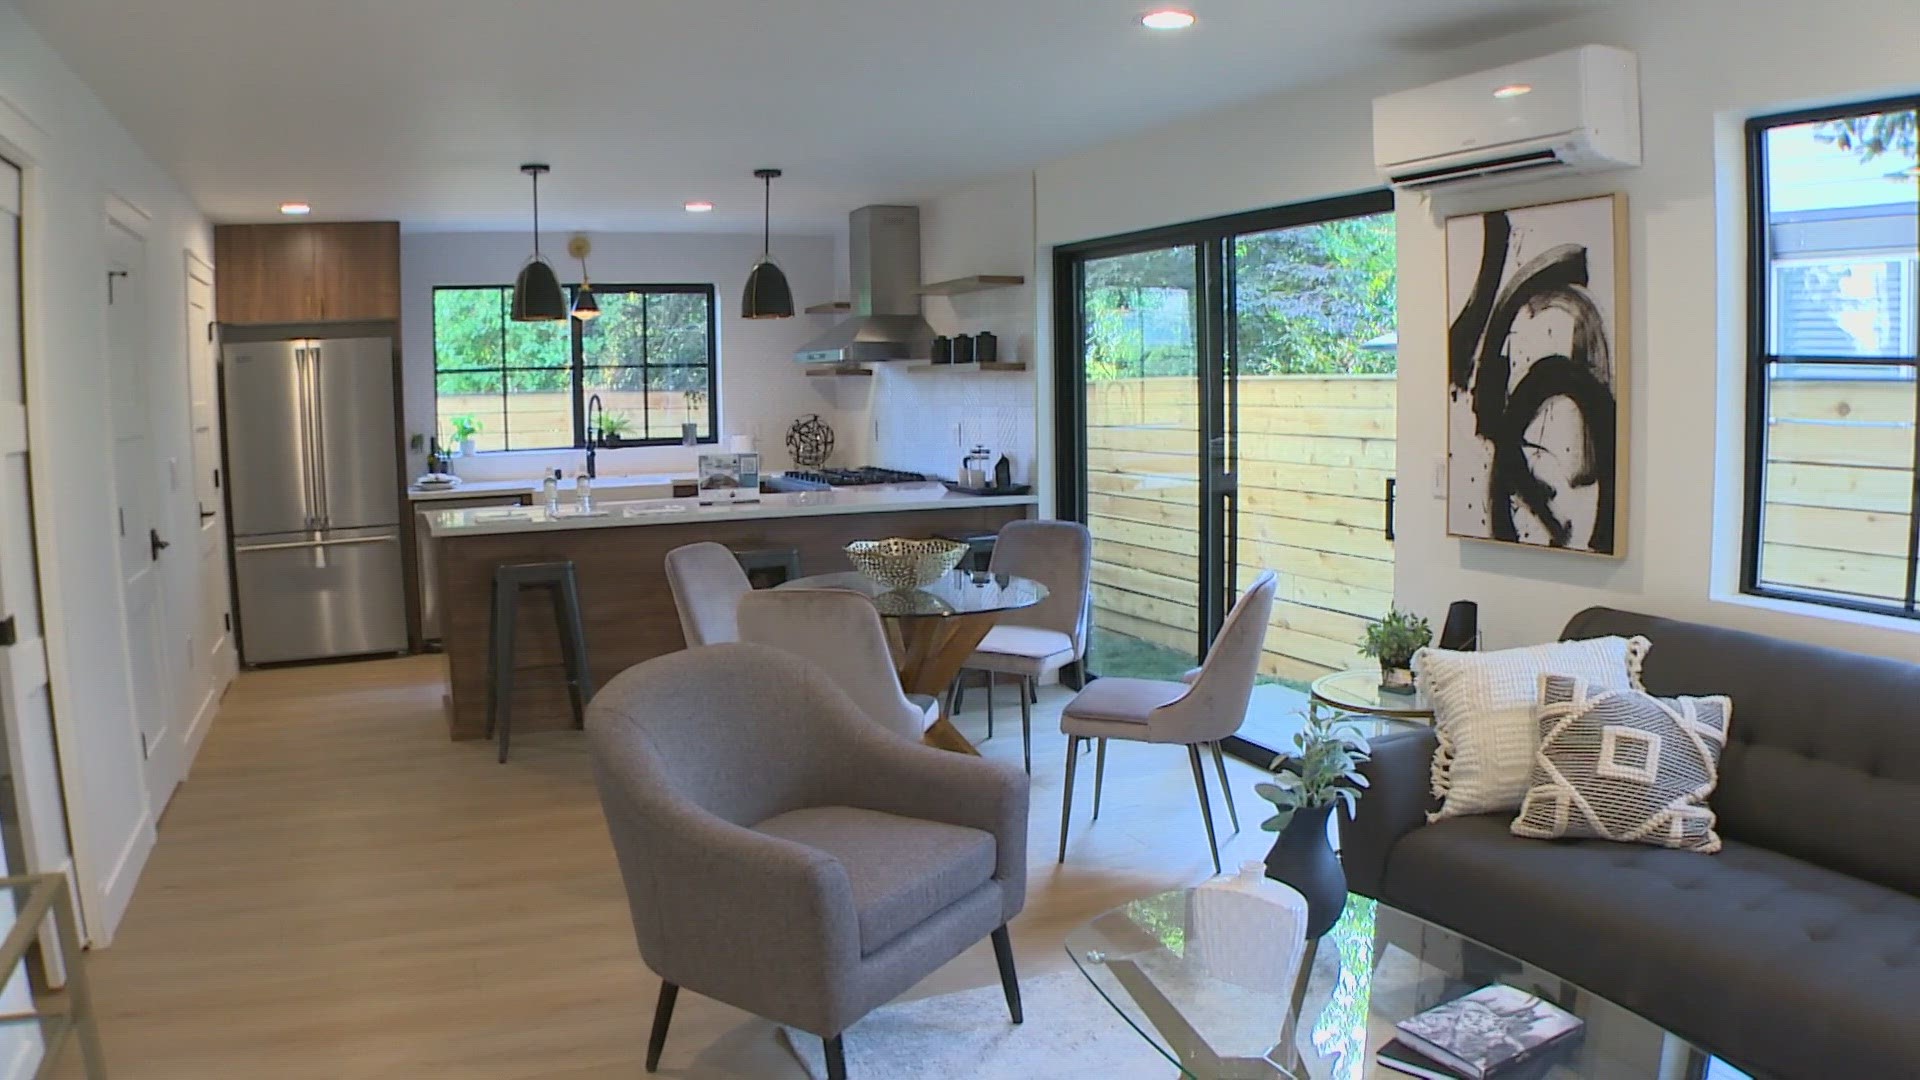 Would you pay $200k to own 25% of this Seattle home?